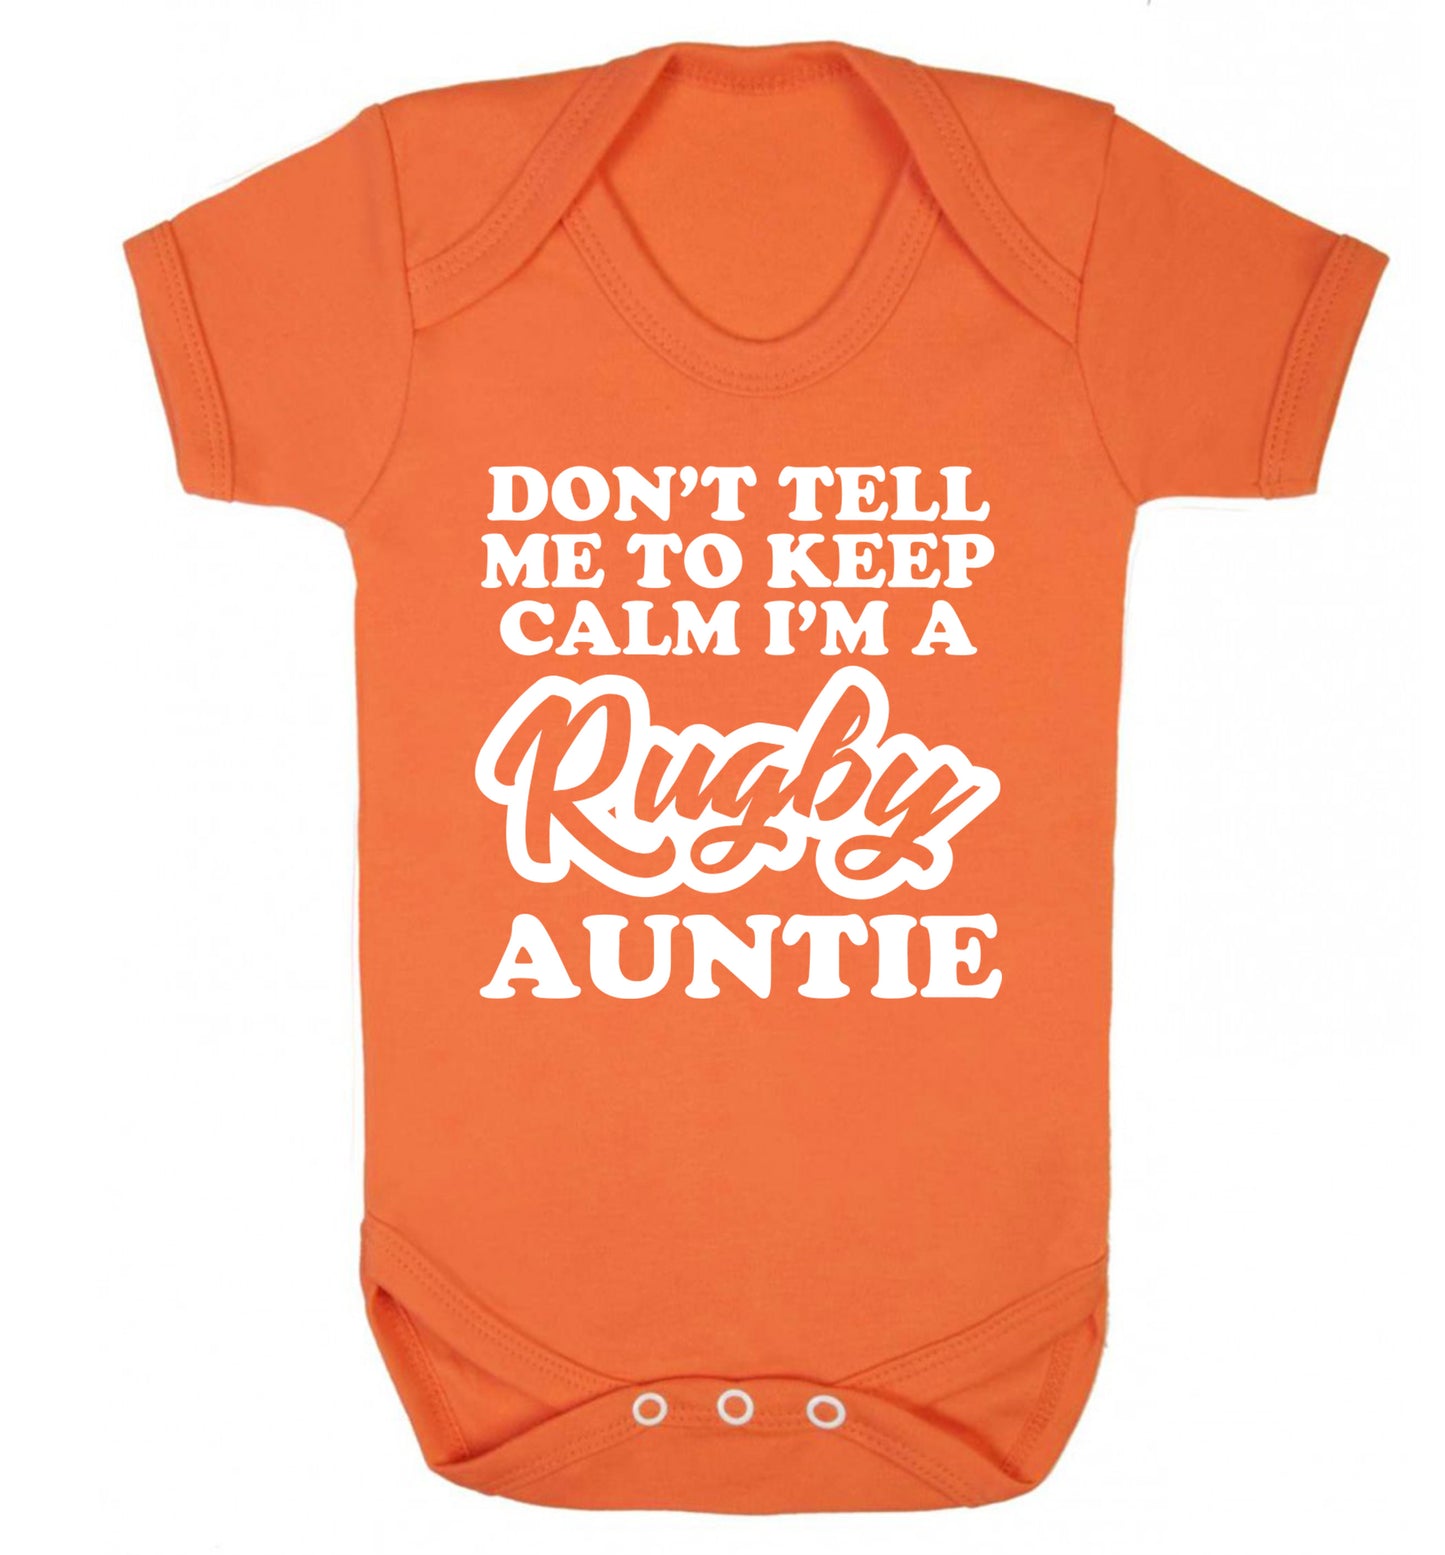 Don't tell me keep calm I'm a rugby auntie Baby Vest orange 18-24 months